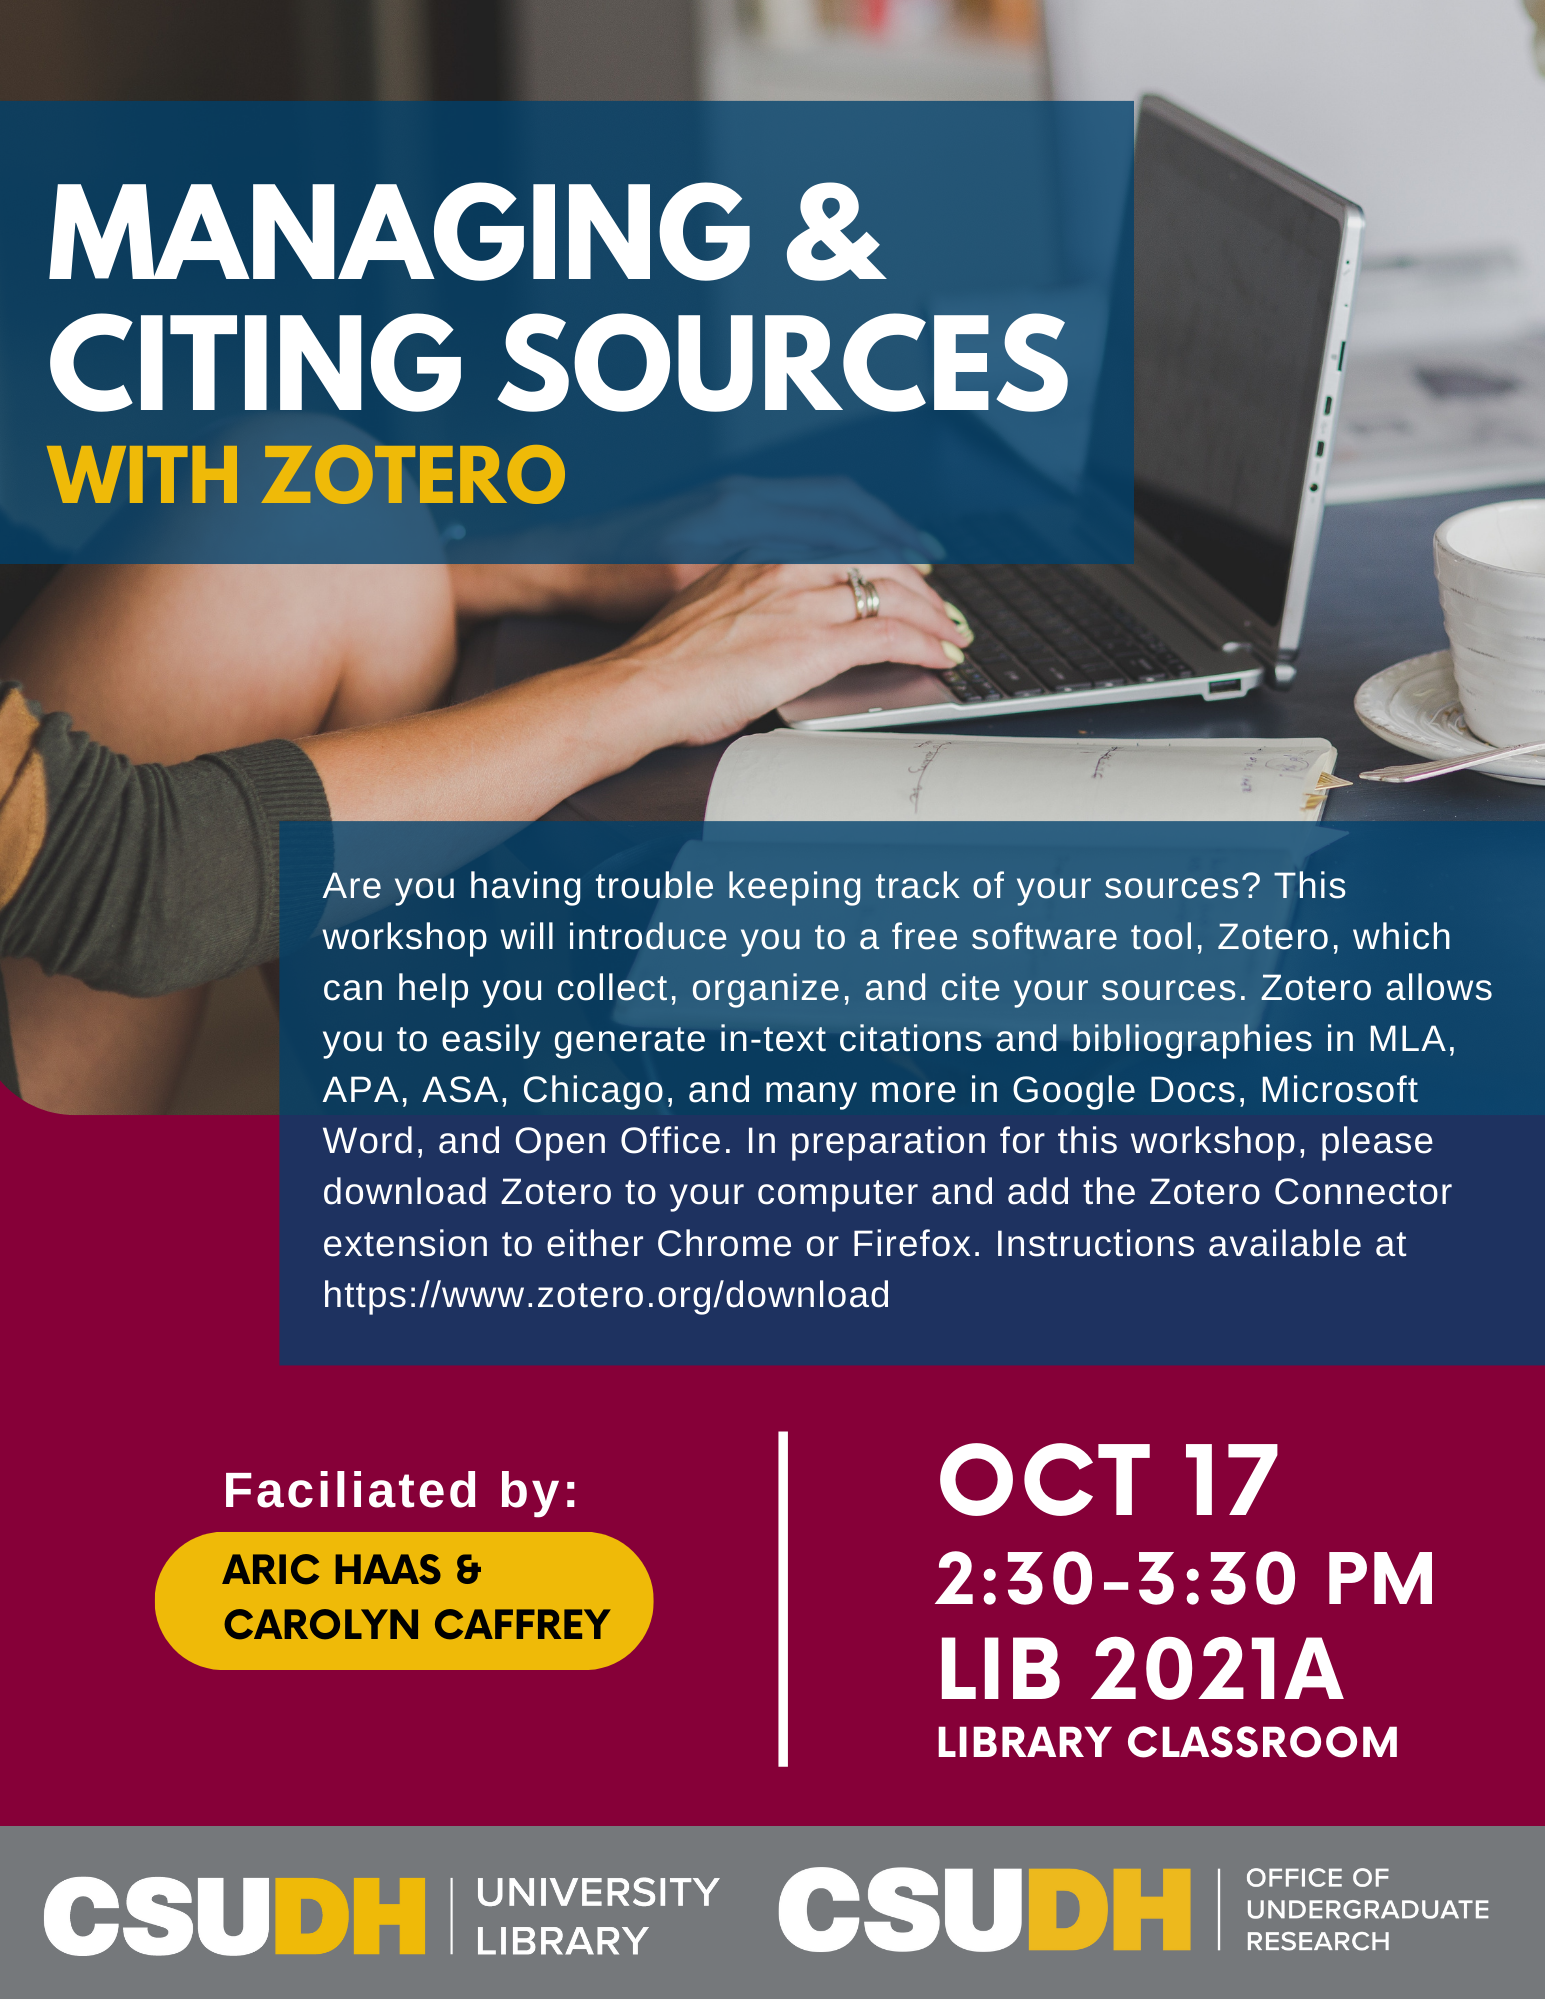 Managing-Citing-Sources-with-Zotero-10-17-23